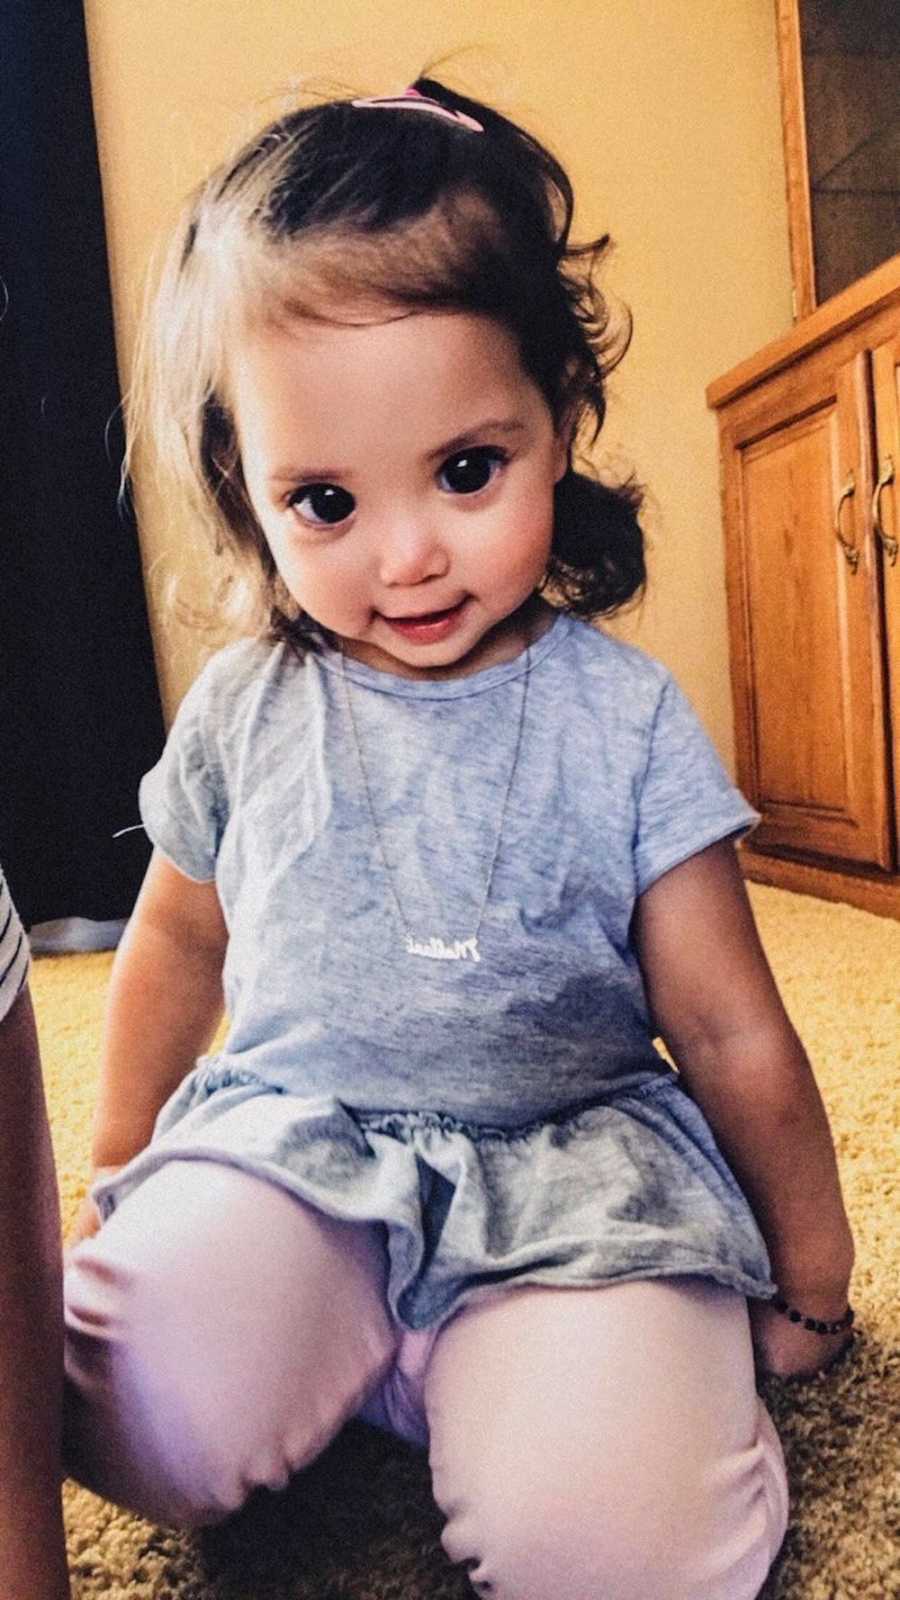 Toddler with Axenfeld-Rieger syndrome whose eyes are mostly pupil, sits on her knees smiling